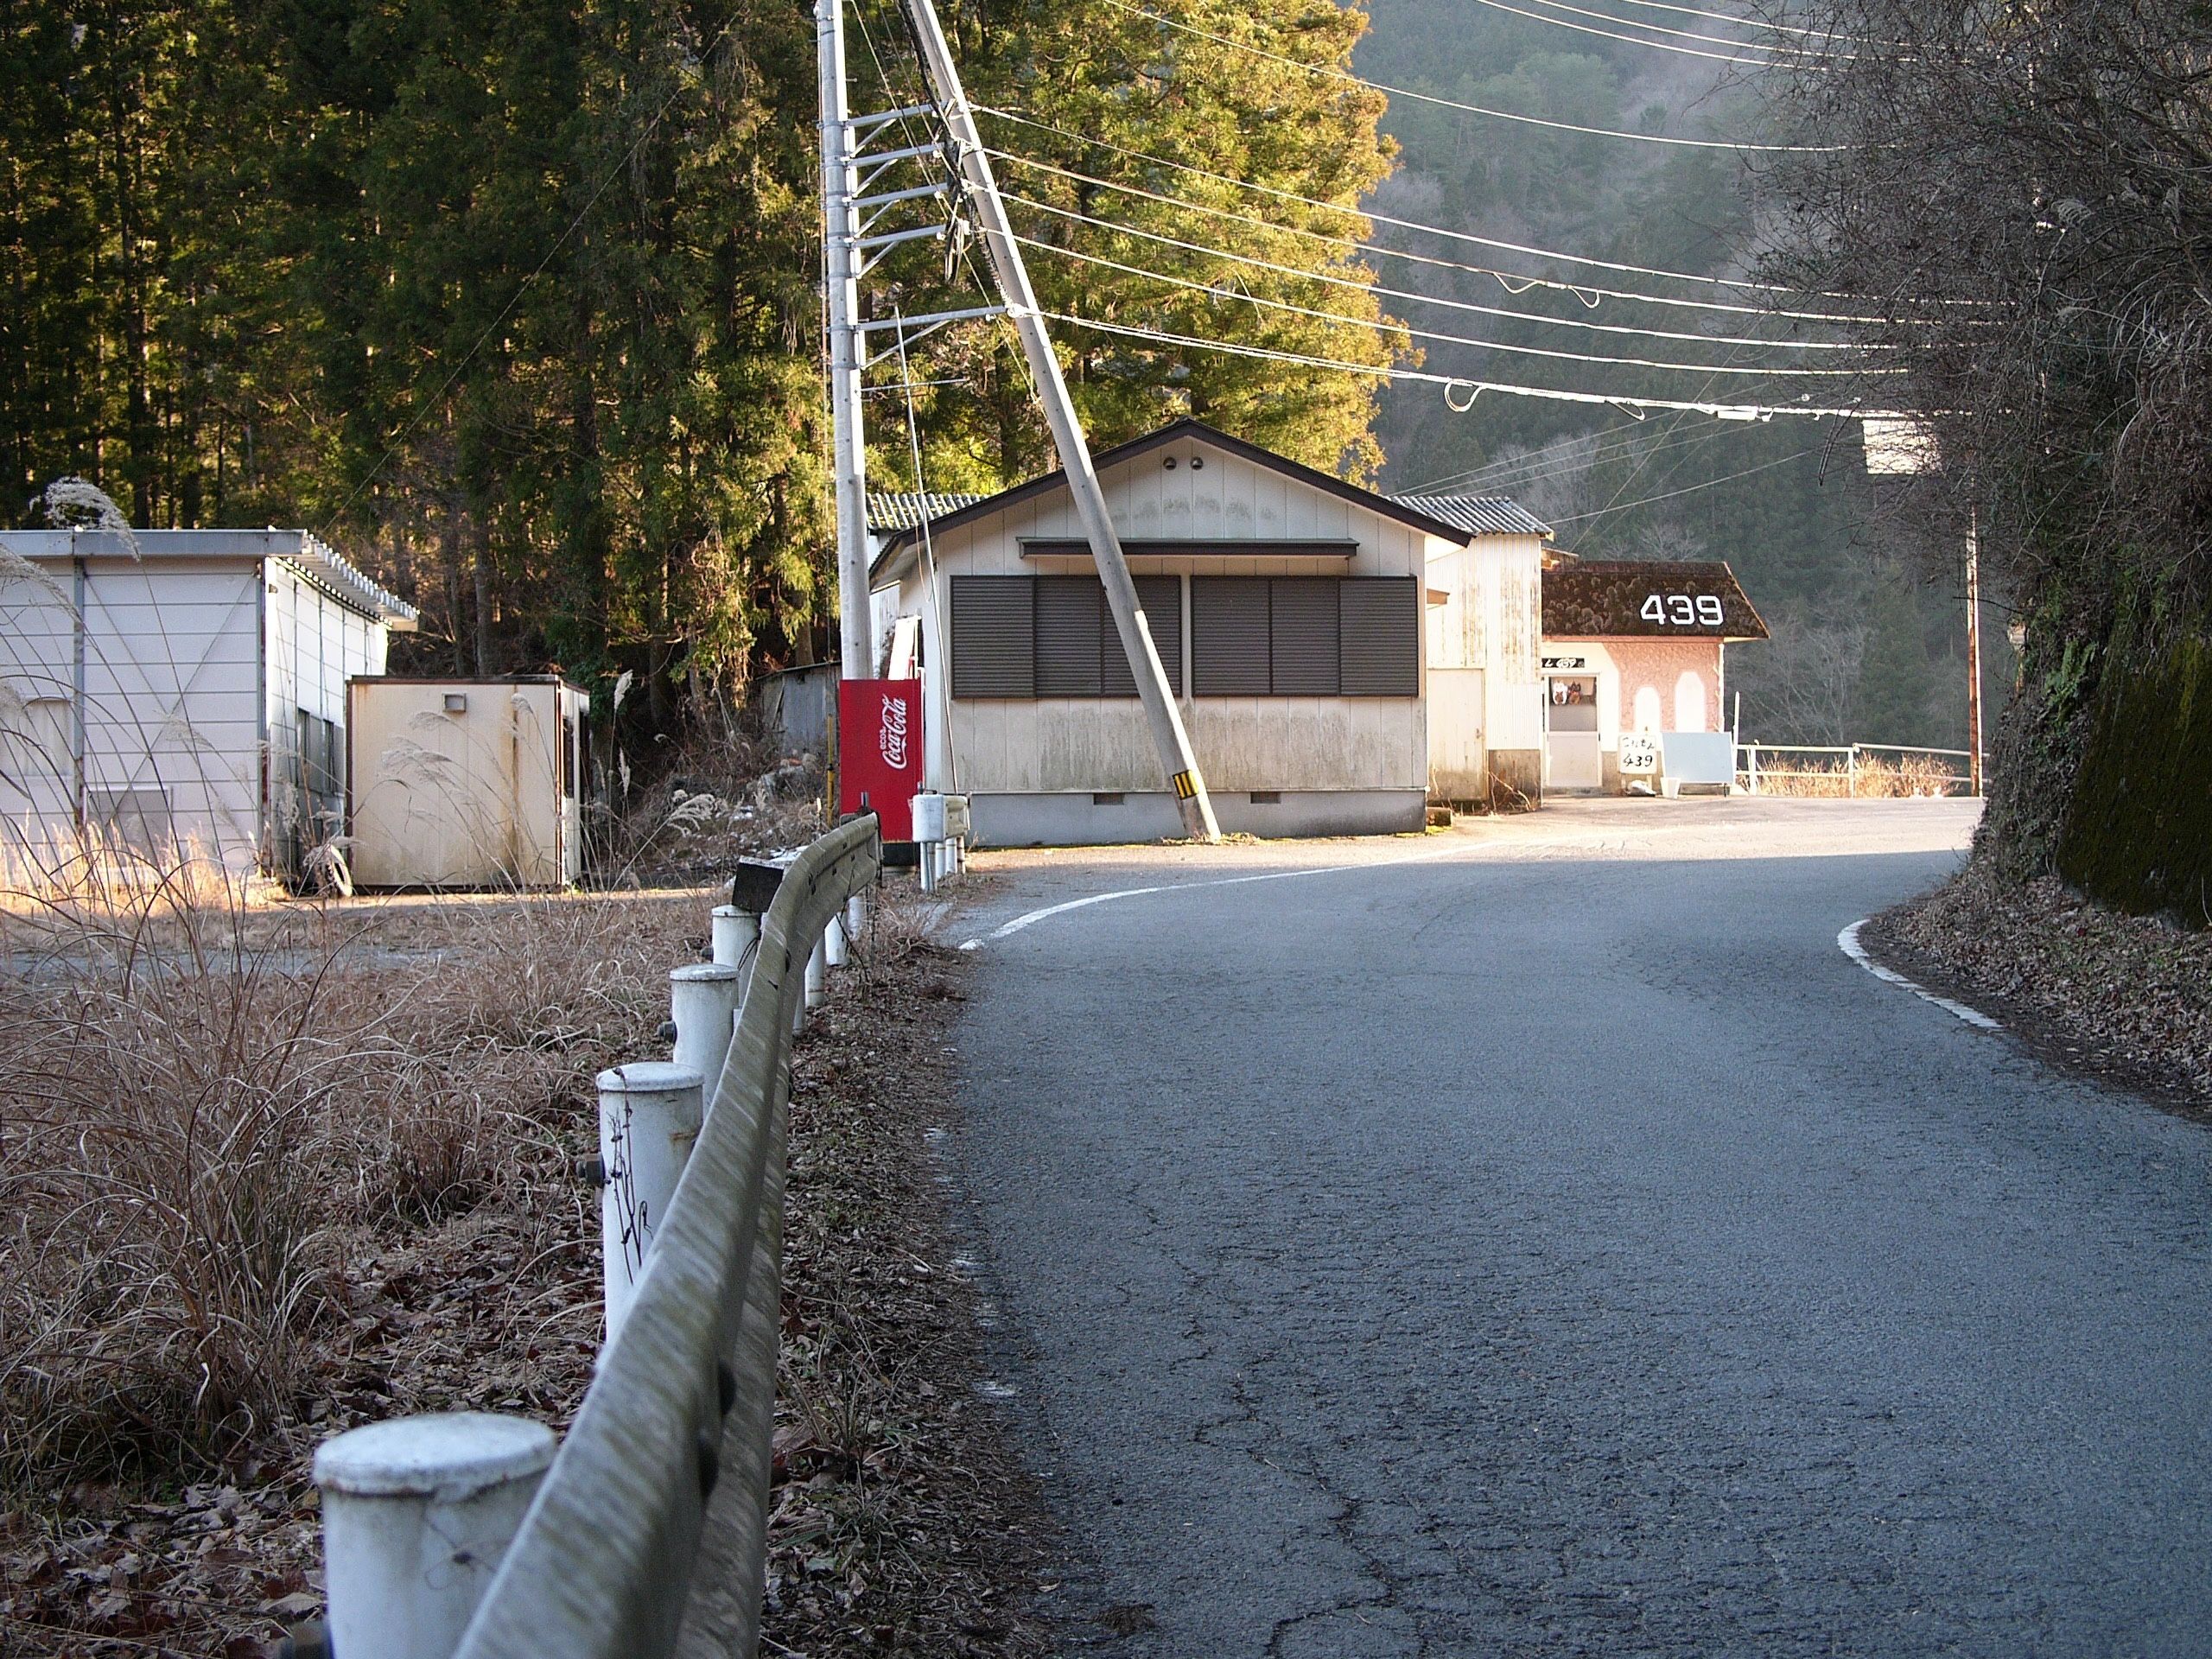 A roadside café in a bend in the road lit by the afternoon sun.